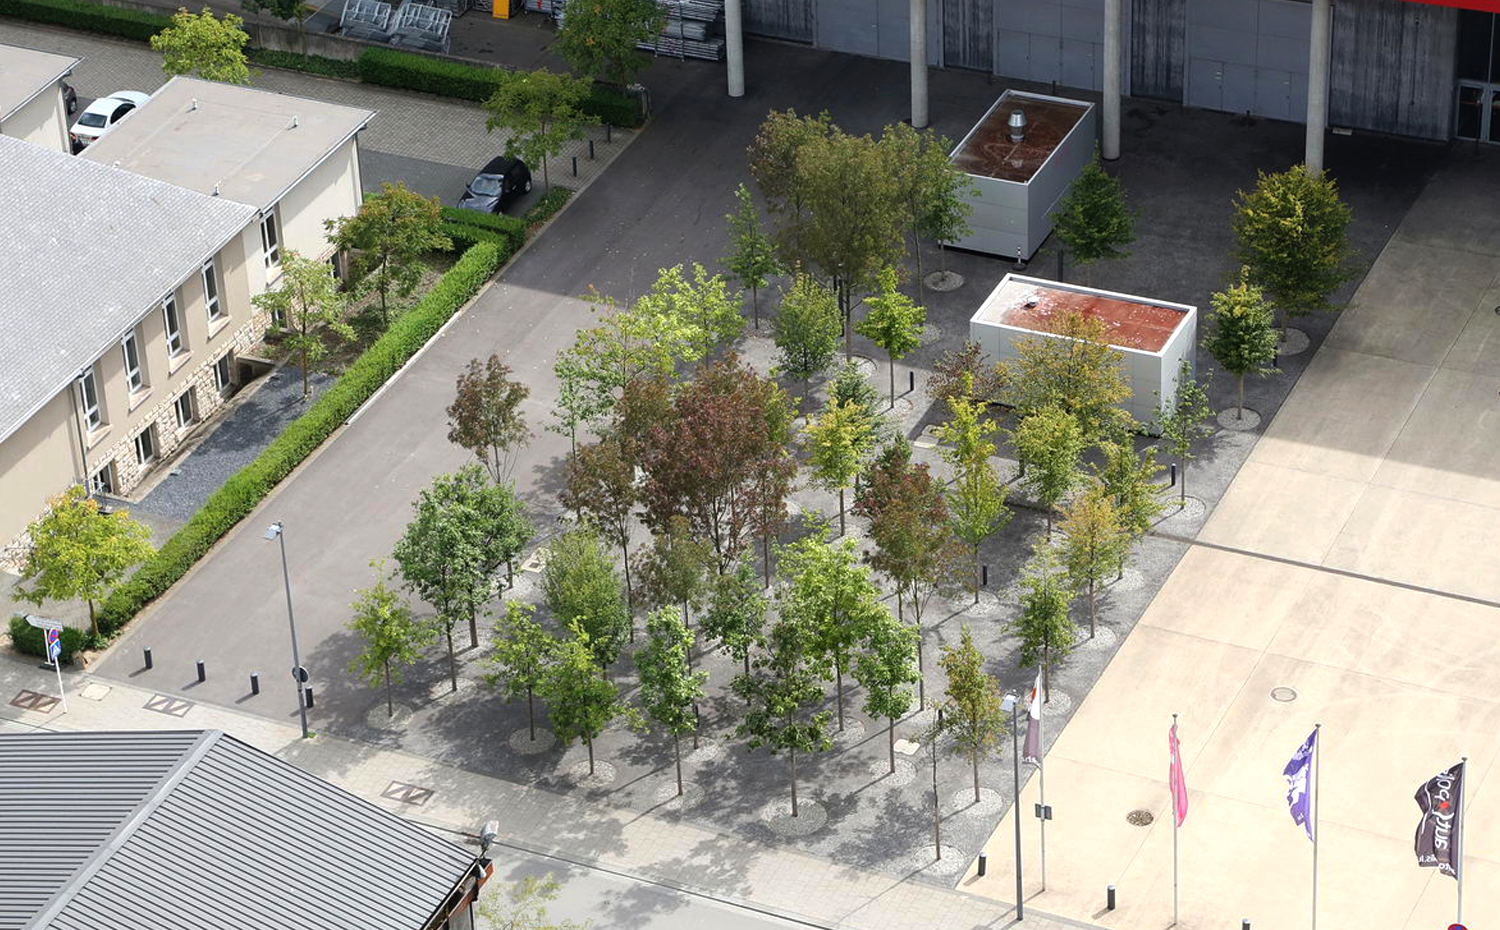    
  
 12.00 
  
     To enhance the barren concrete surface in front of the concert hall two densely planted forecourts were created. The dense tree planting offers a pleasant atmosphere with an attractive seasonal change in the urban environment o